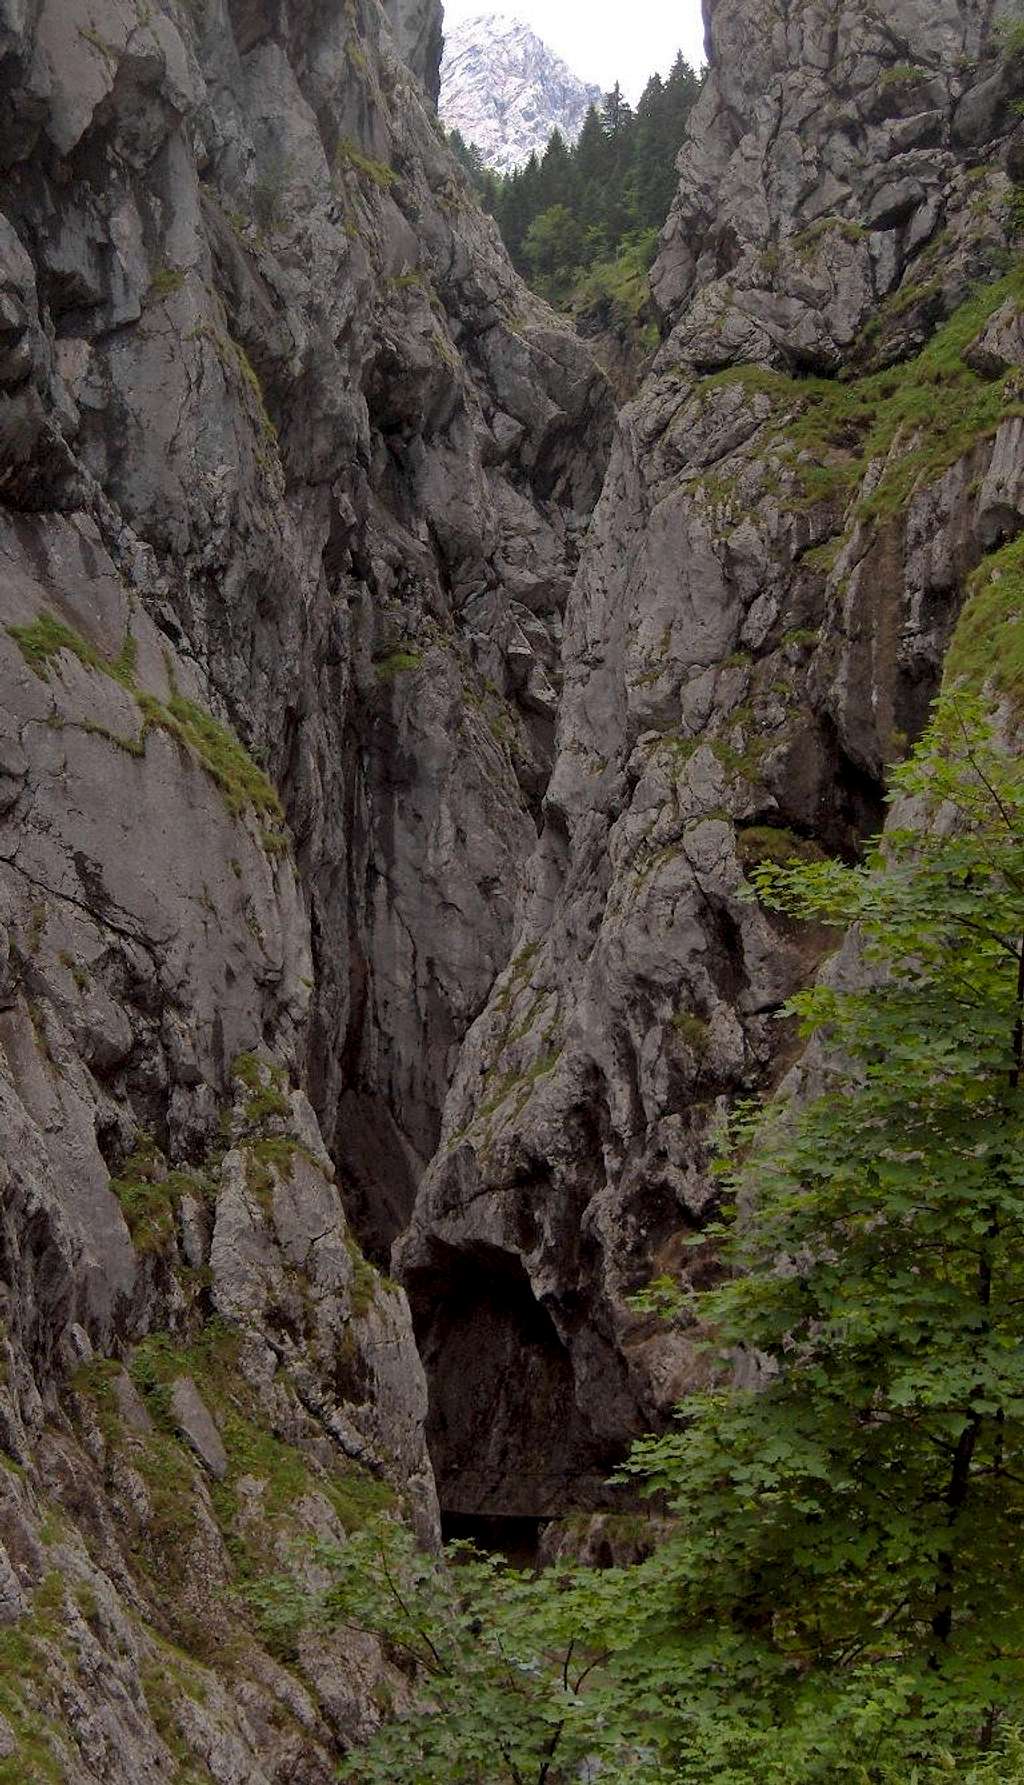 Approaching the entrance to the Höllental canyon